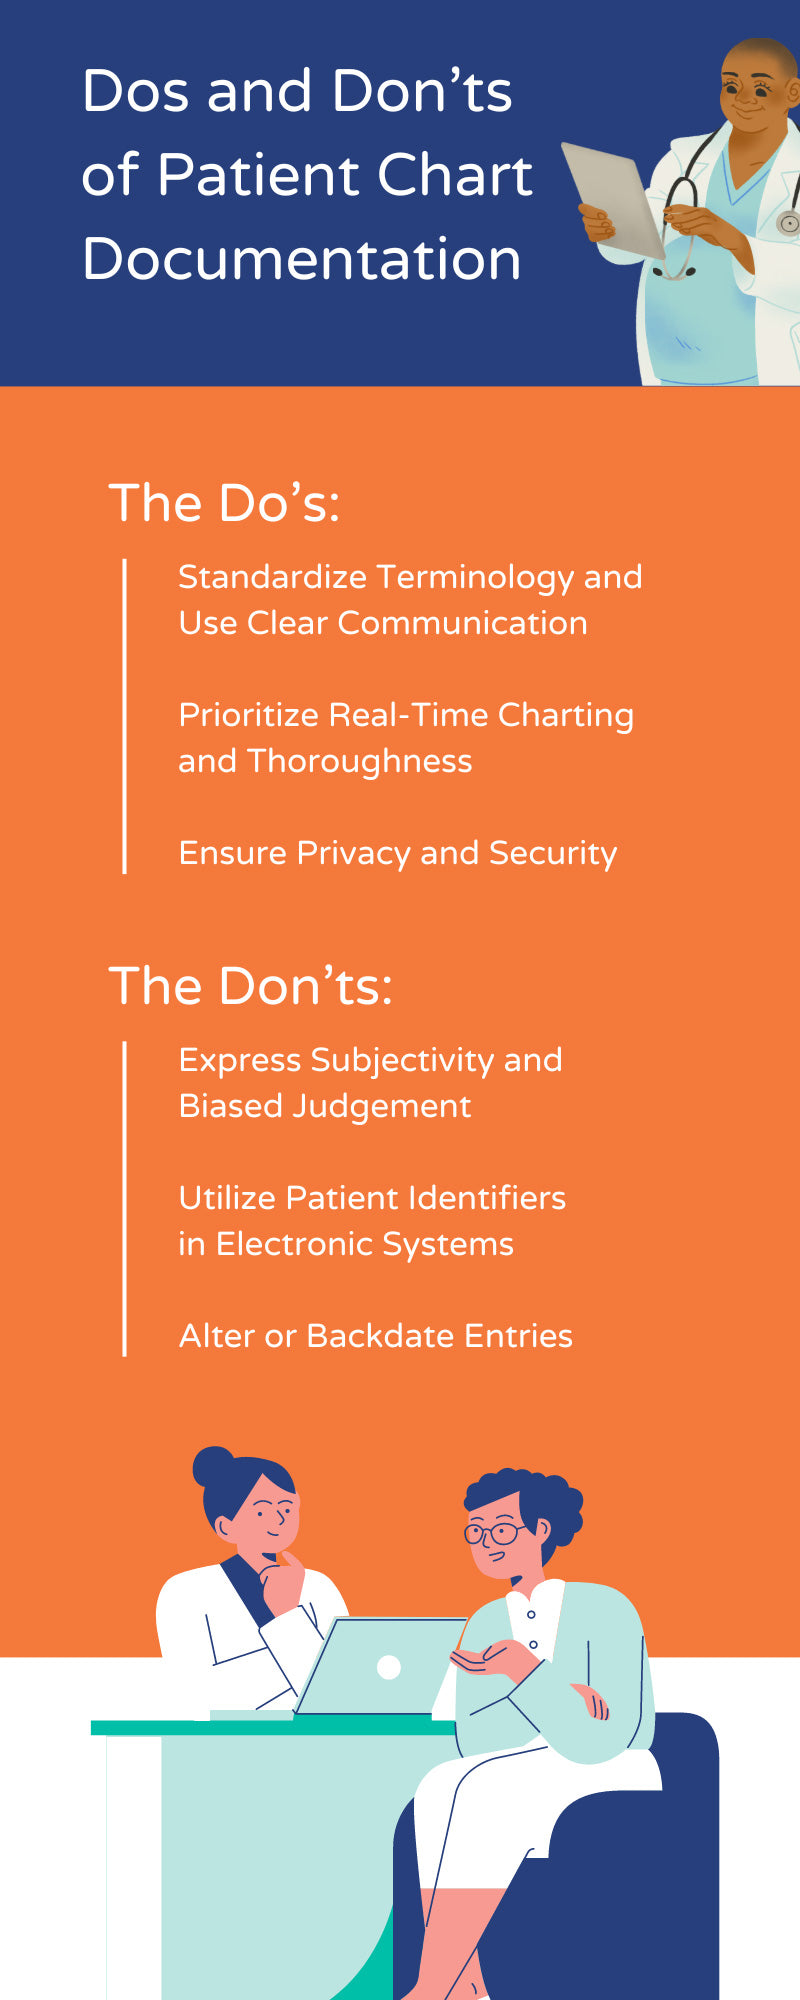 Dos and Don’ts of Patient Chart Documentation